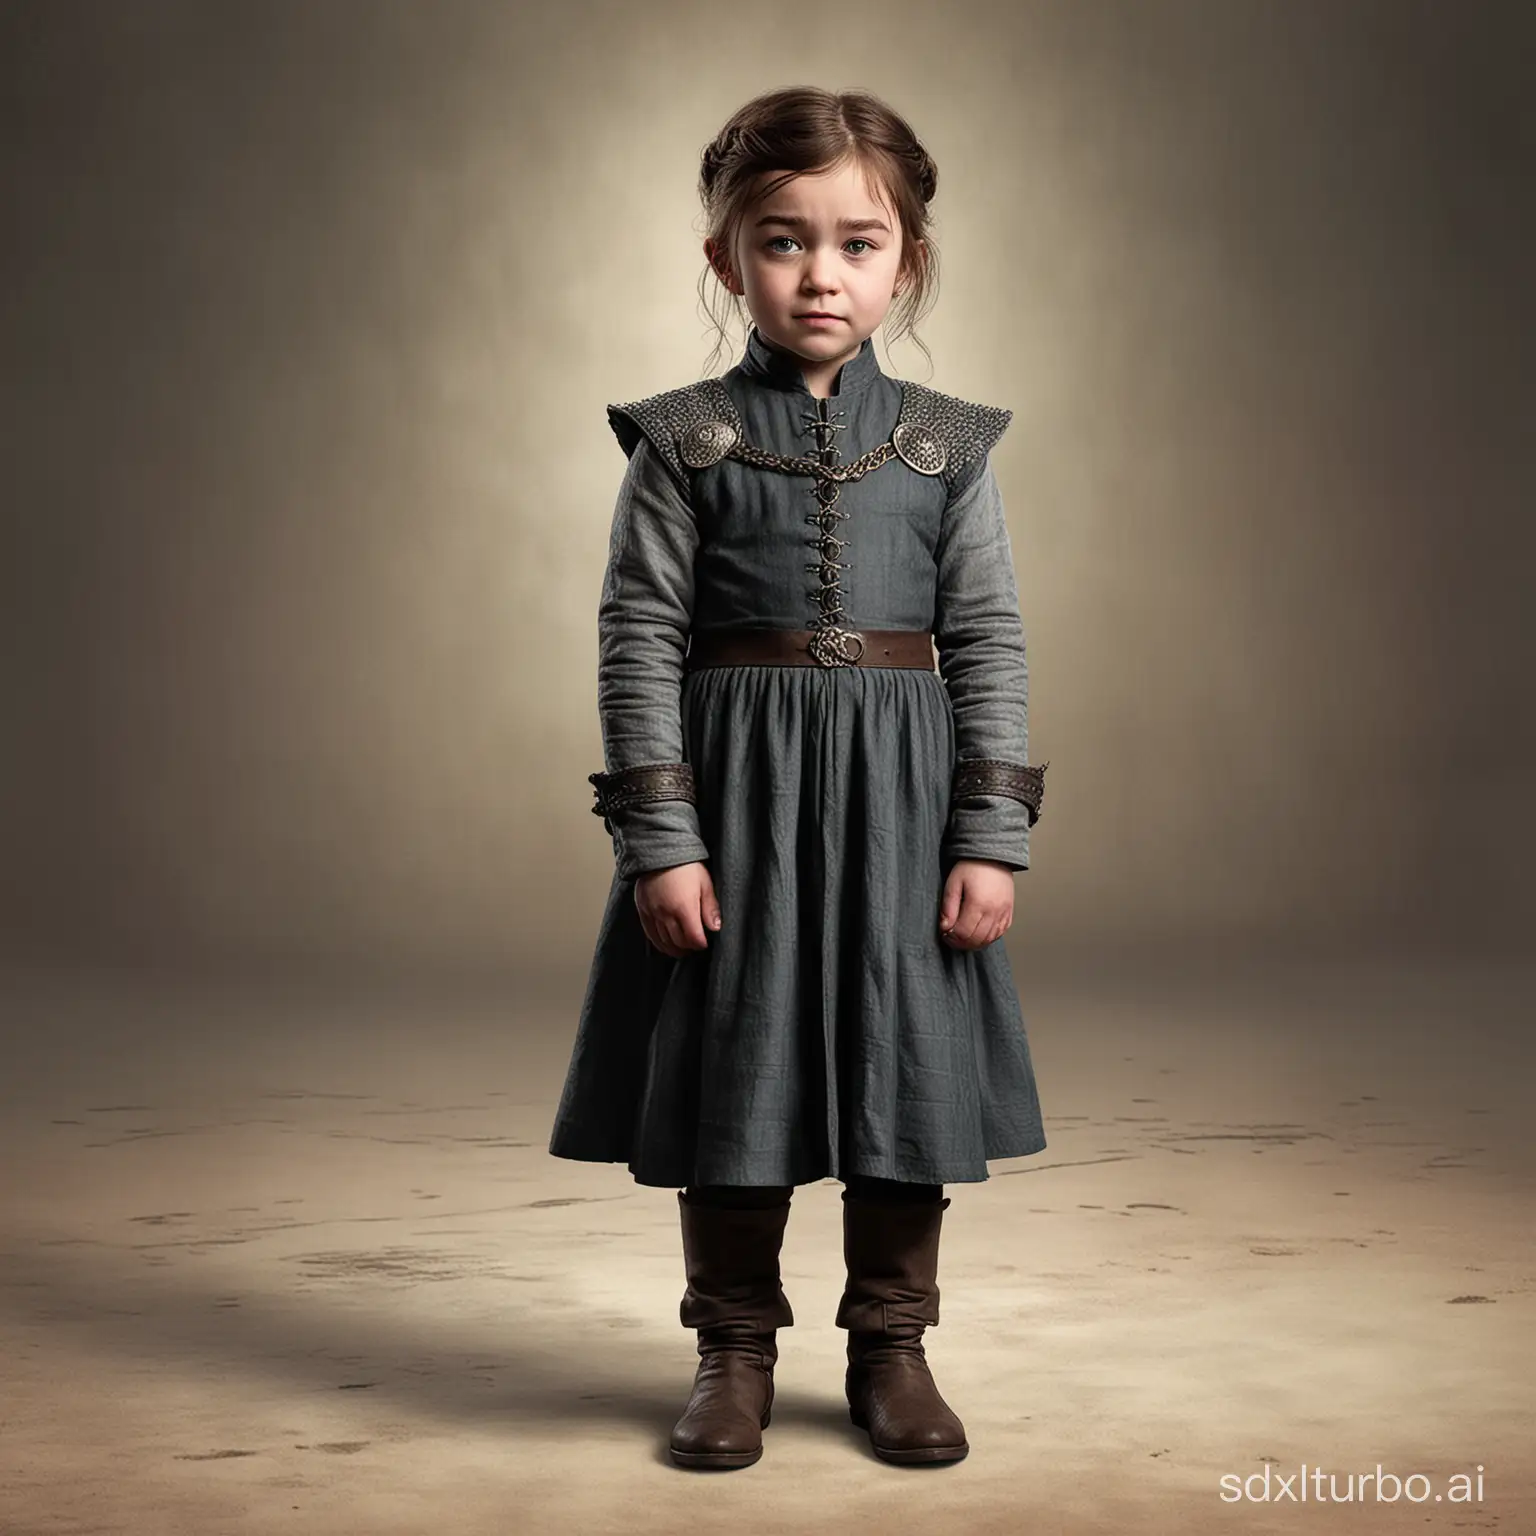 Little child aria stark from serial game of thrones, game character, stands at full height